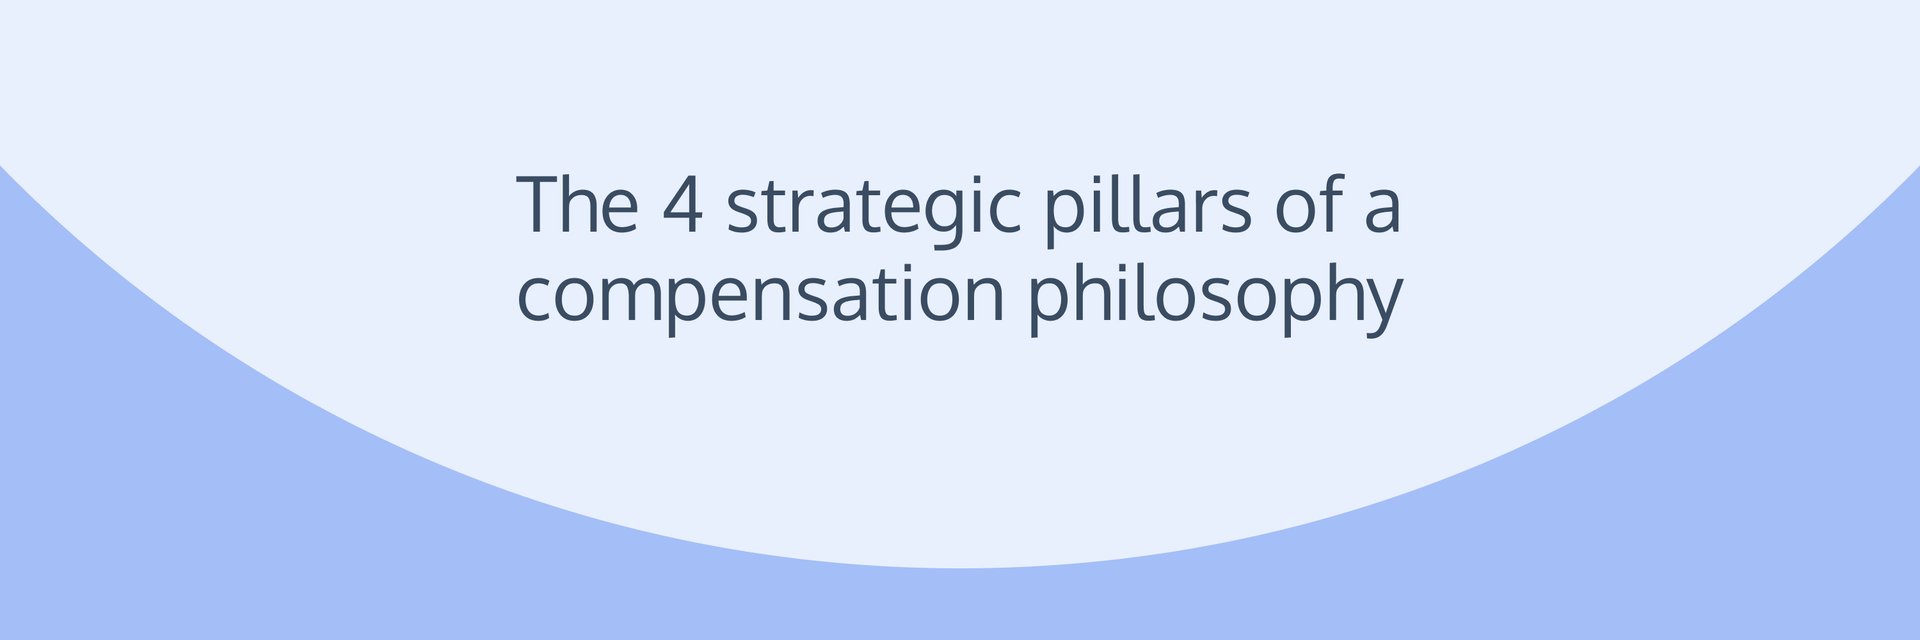 The 4 strategic pillars of a compensation philosophy